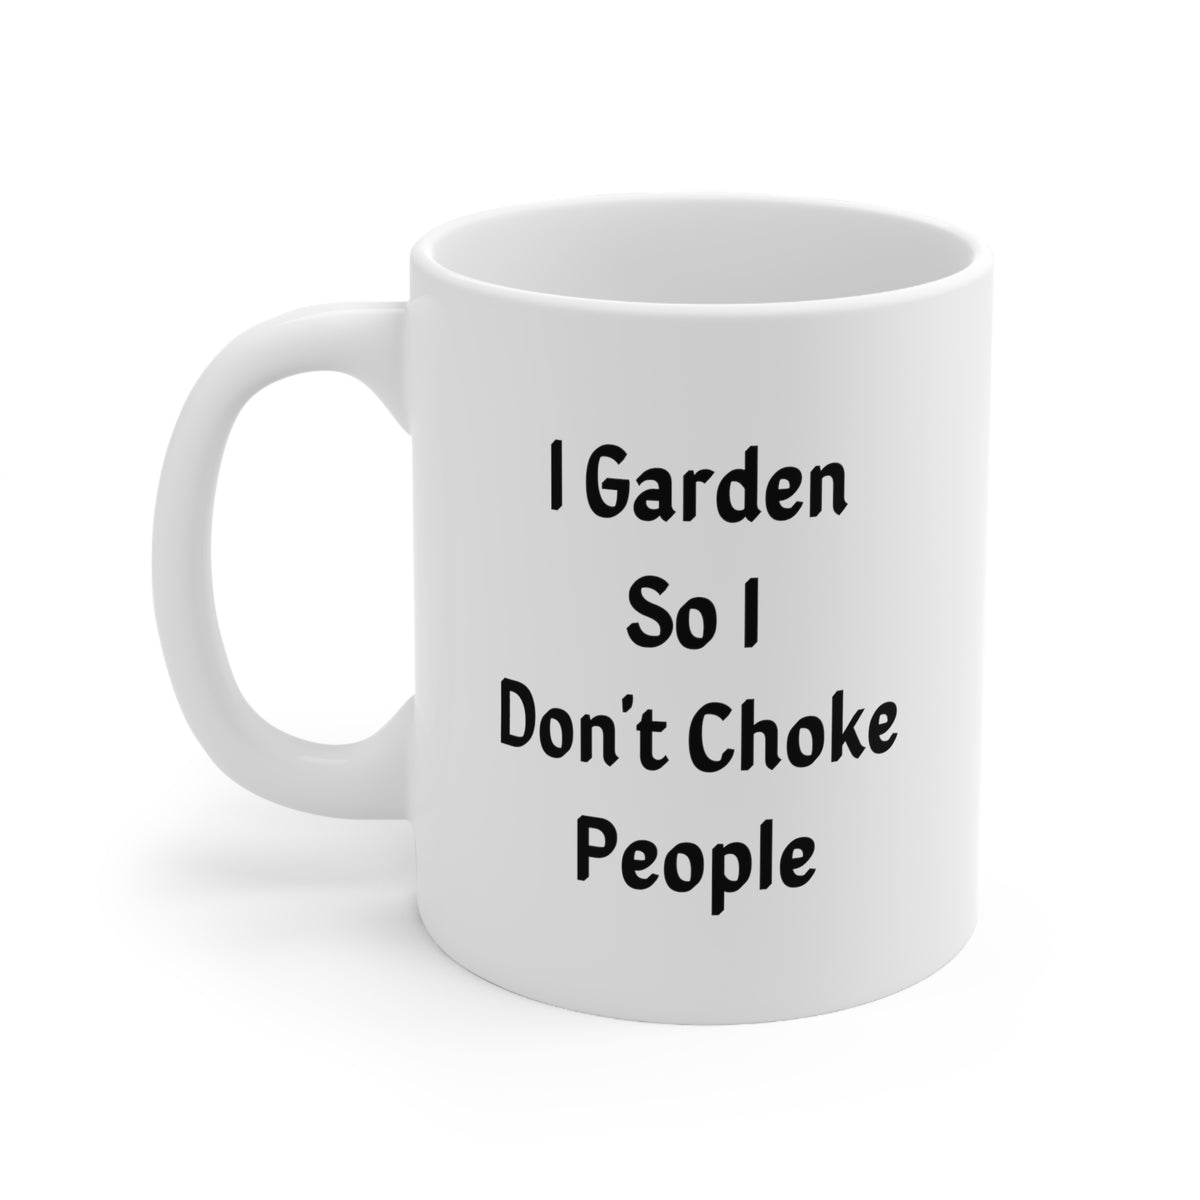 Funny Garden Coffee Mug - I Garden So I Don't Choke People Cup - Gardening Gifts and Sarcasm